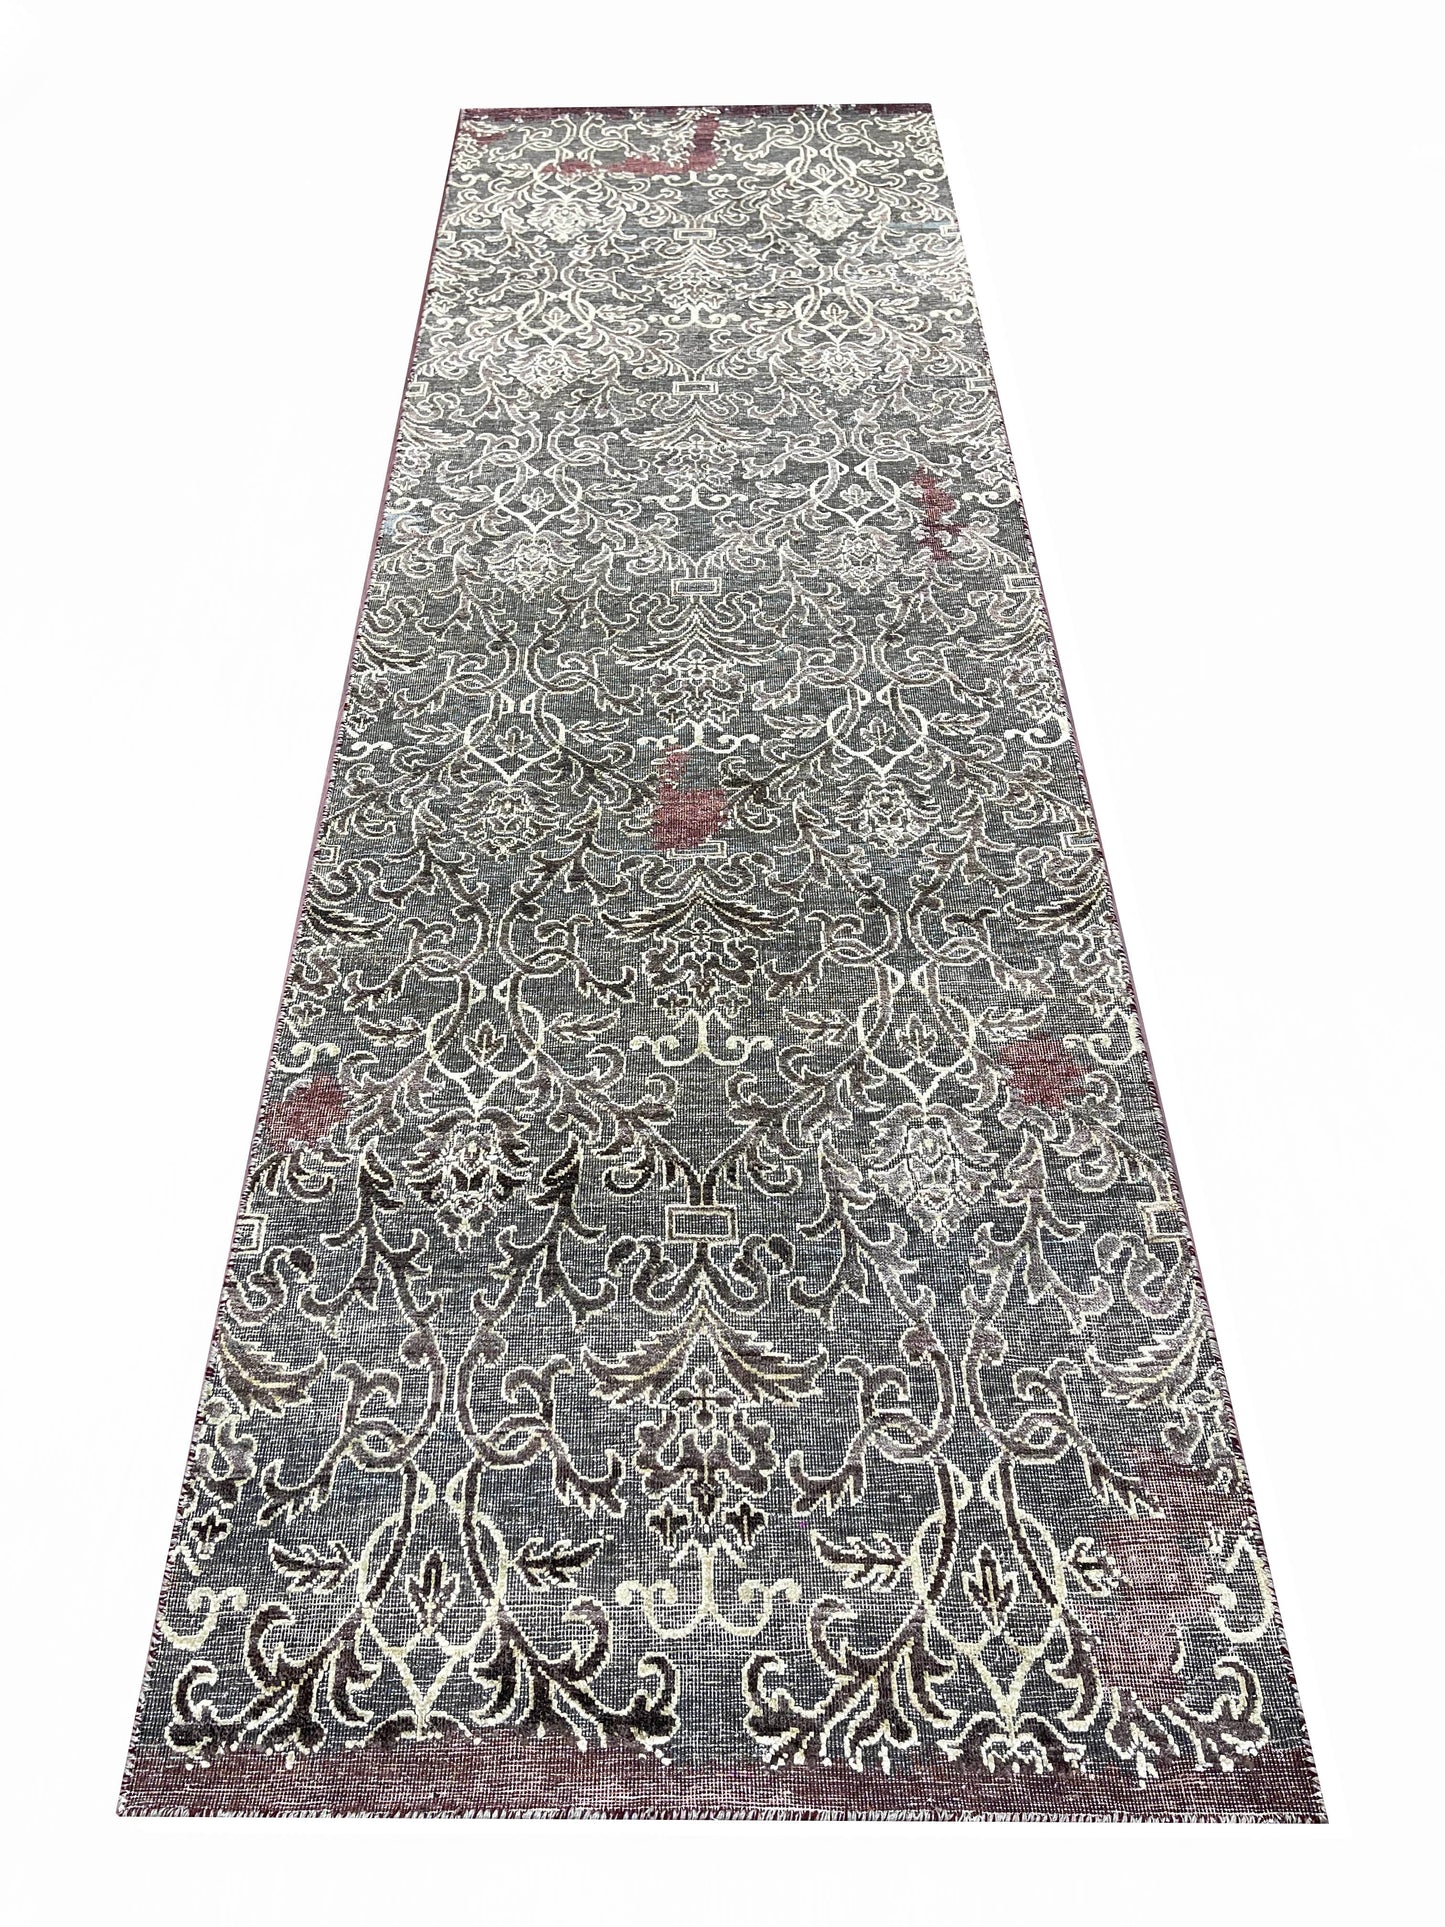 Get trendy with Samarkand Handknotted Runner Rug Brown 3.0X9.7ft 92x293cms - Runner Rugs available at Jaipur Oriental Rugs. Grab yours for $1555.00 today!